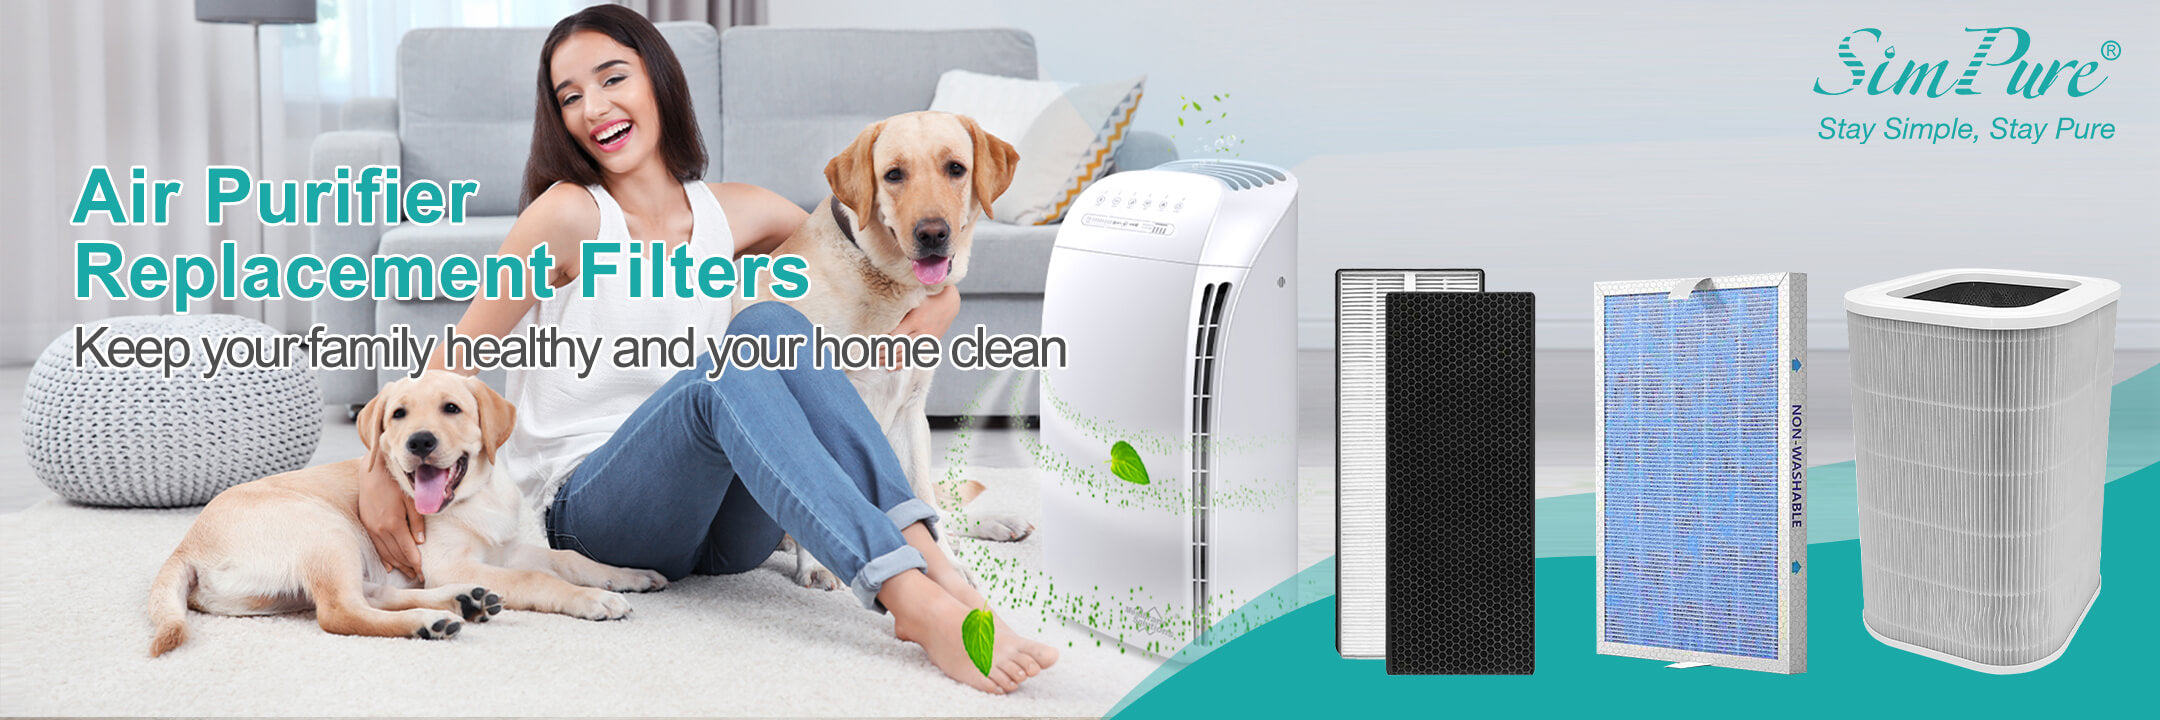 SimPure Air Filters & Air Purifier Replacement Filters